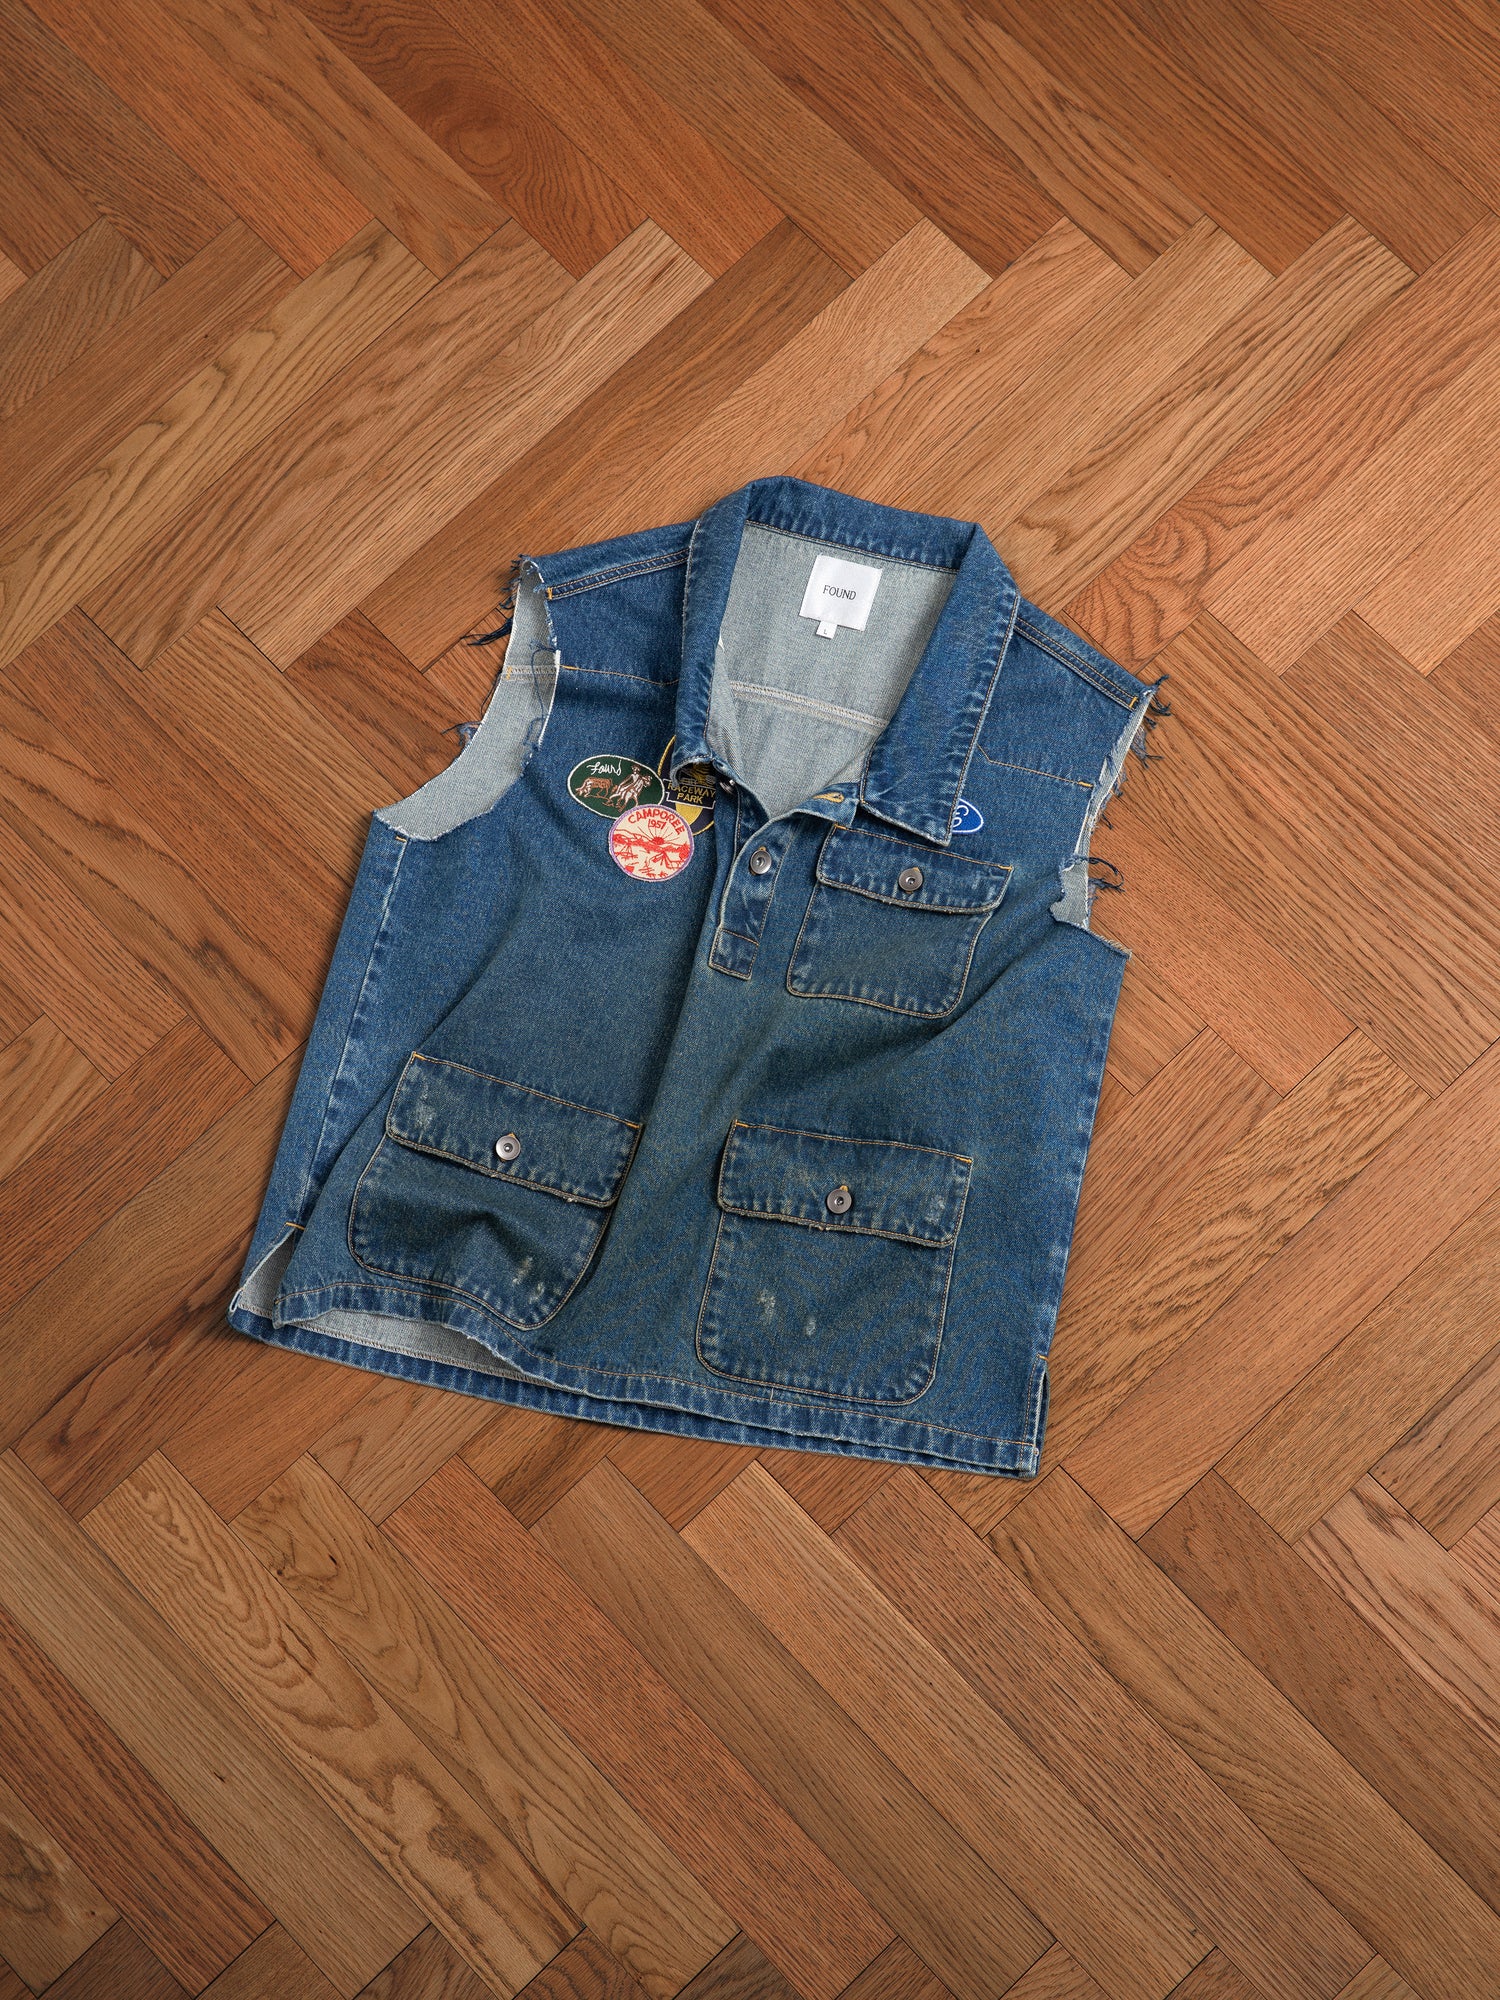 A vintage-inspired Raw Cut Patch Mechanic Denim Vest by Found with embroidered patches on a wooden floor.